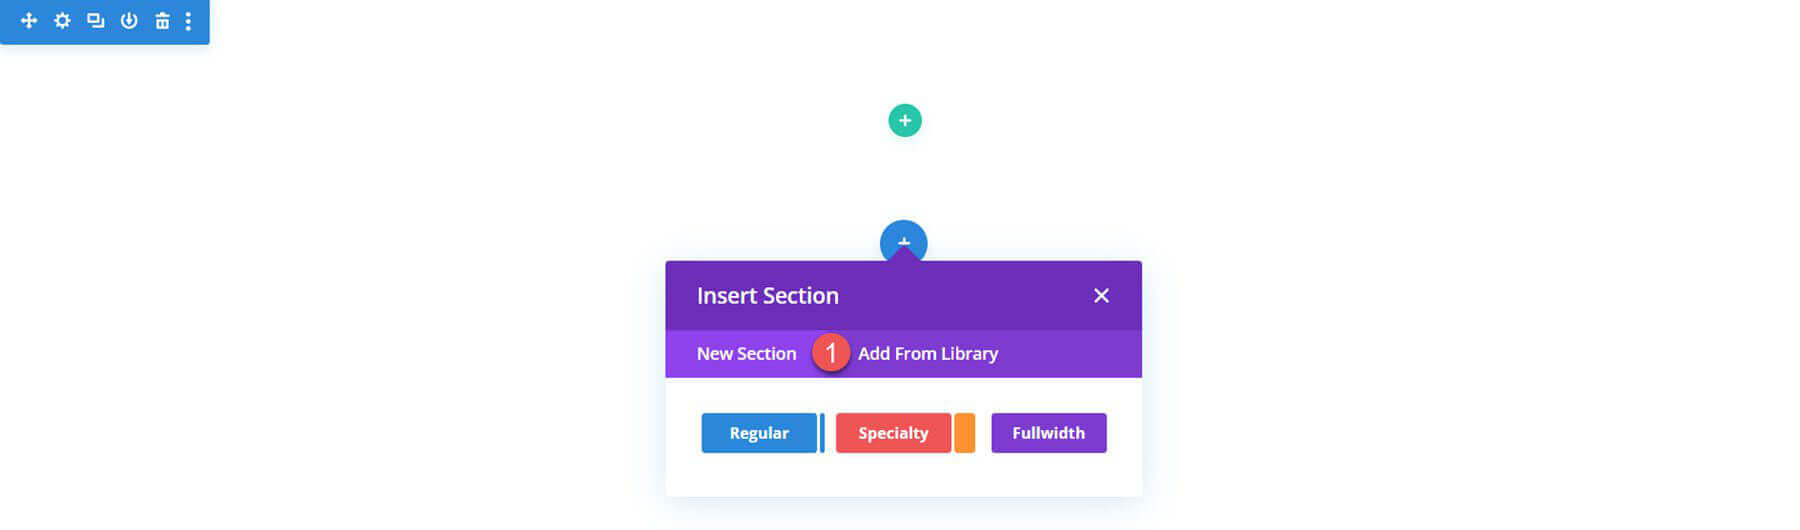 Importing Divi Library Item Json Files On Your Divi Website